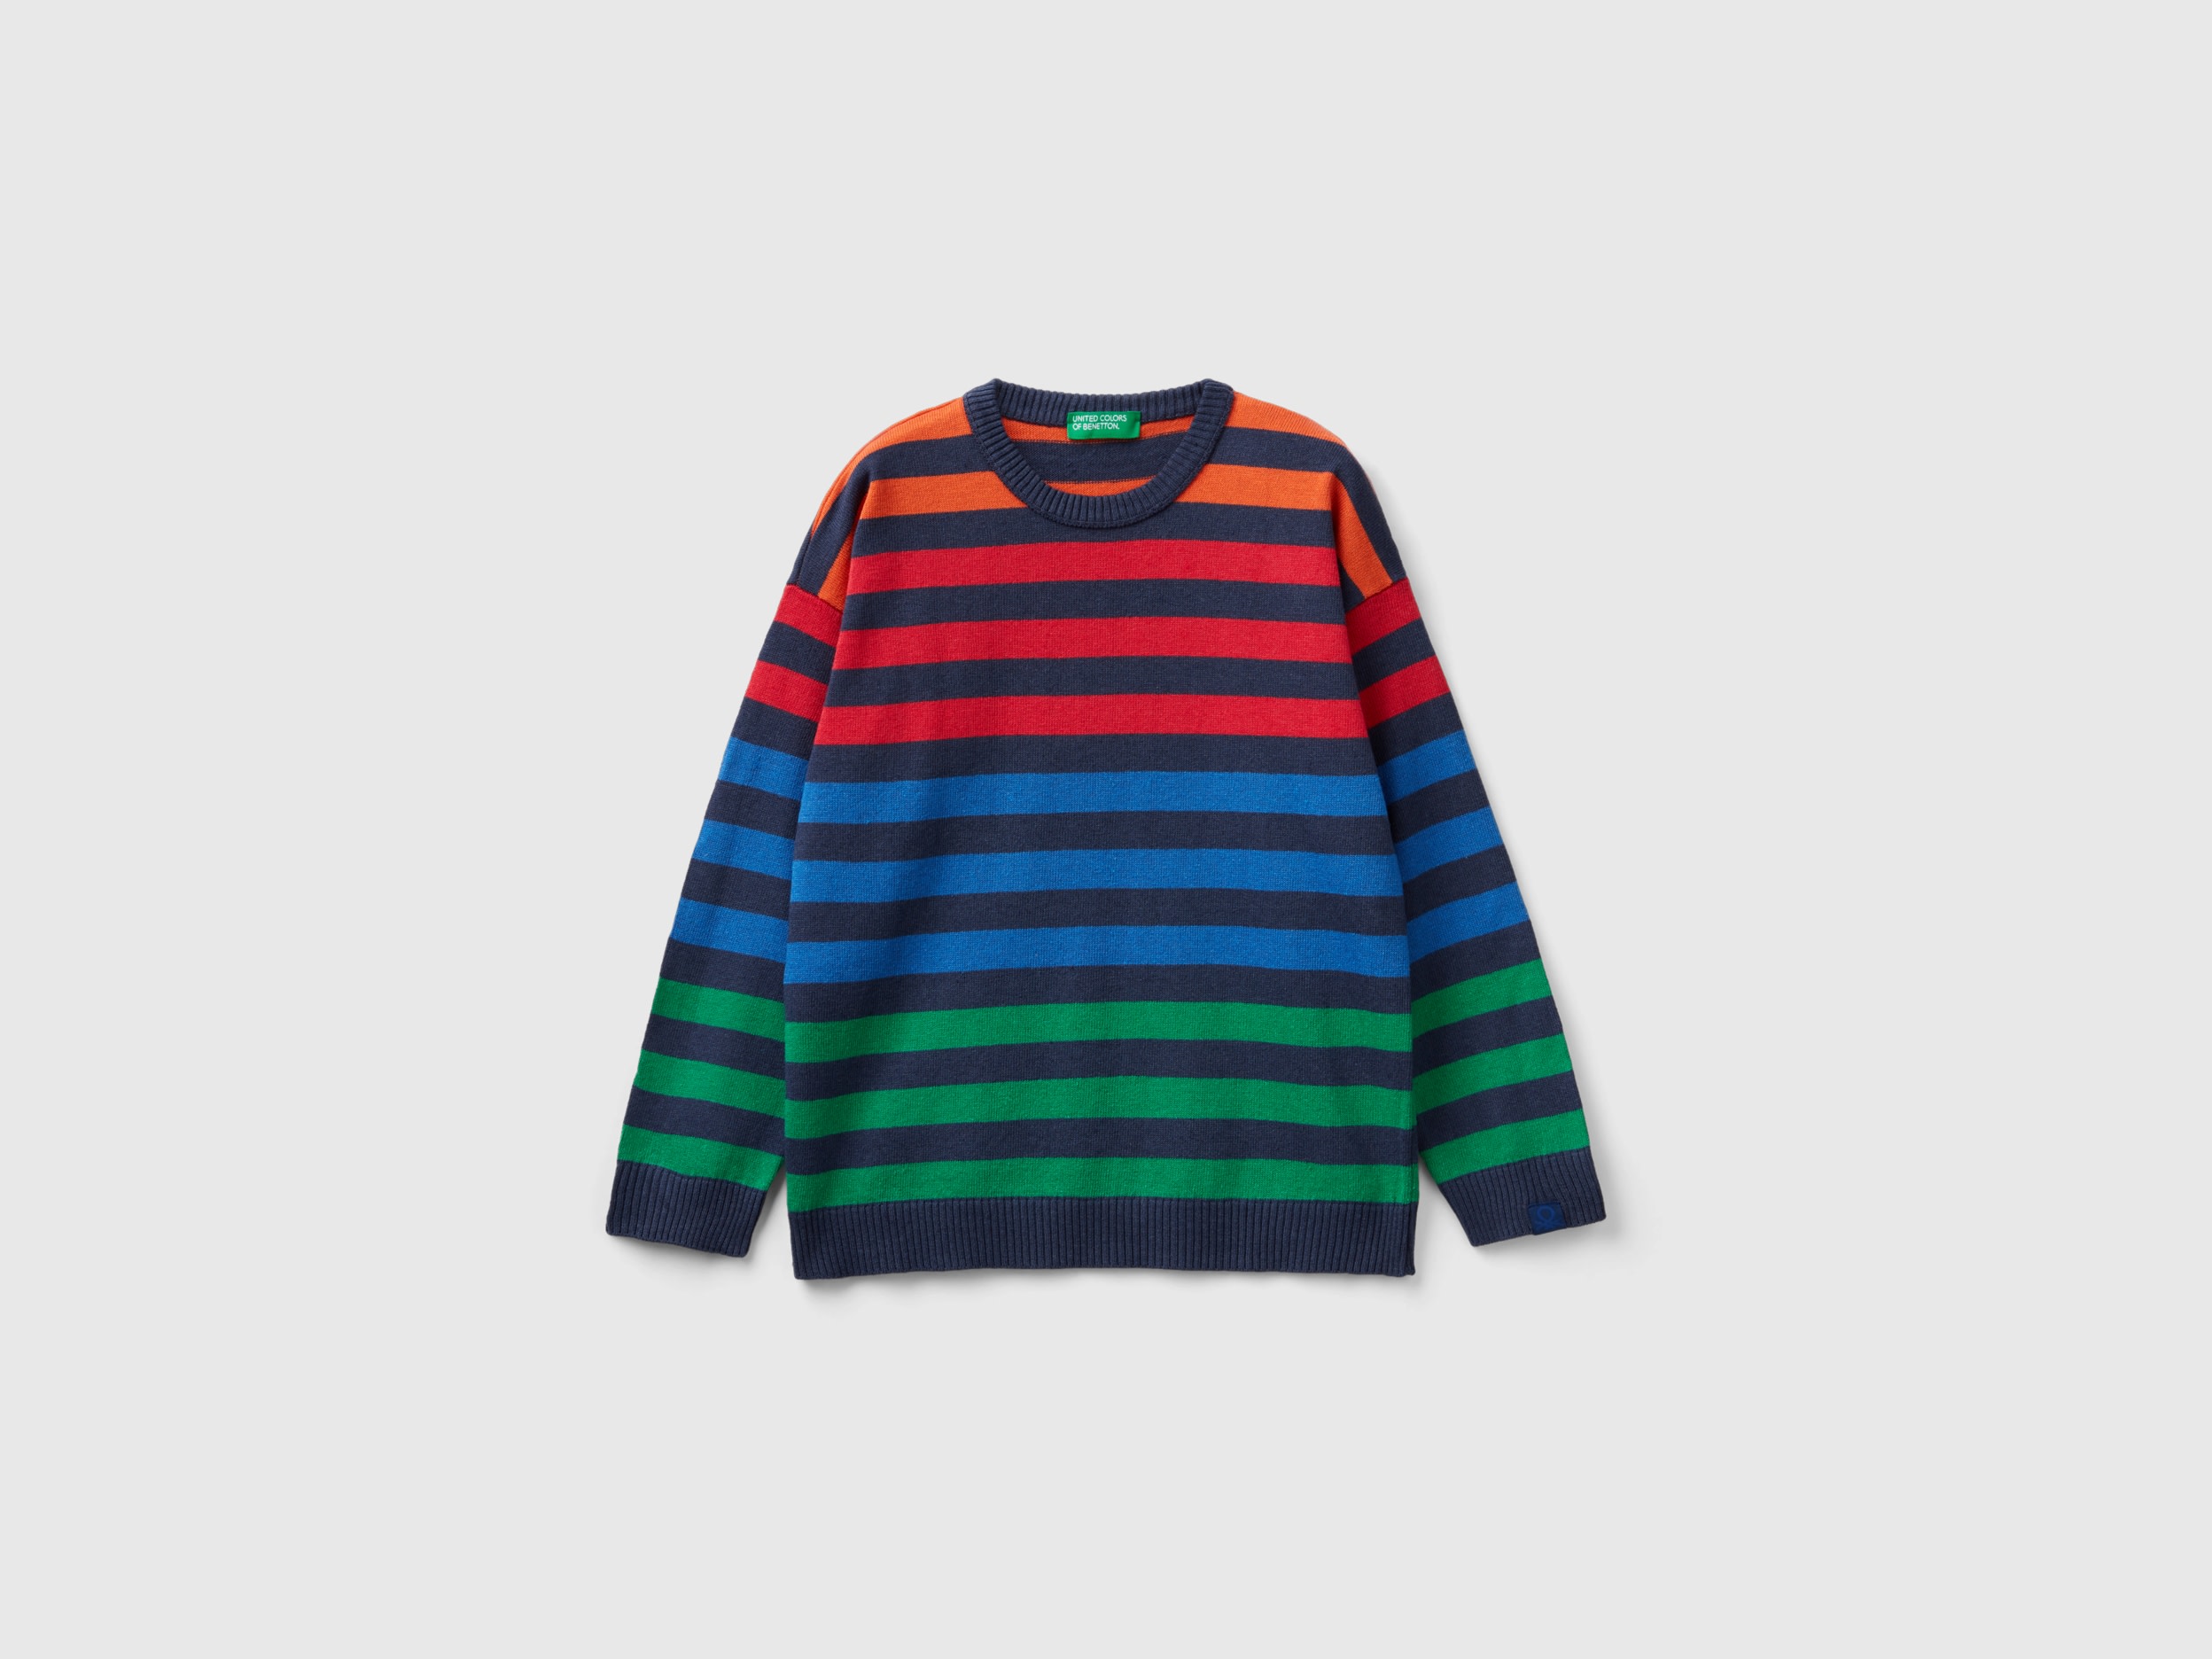 Image of Benetton, Striped Sweater, size XL, Multi-color, Kids